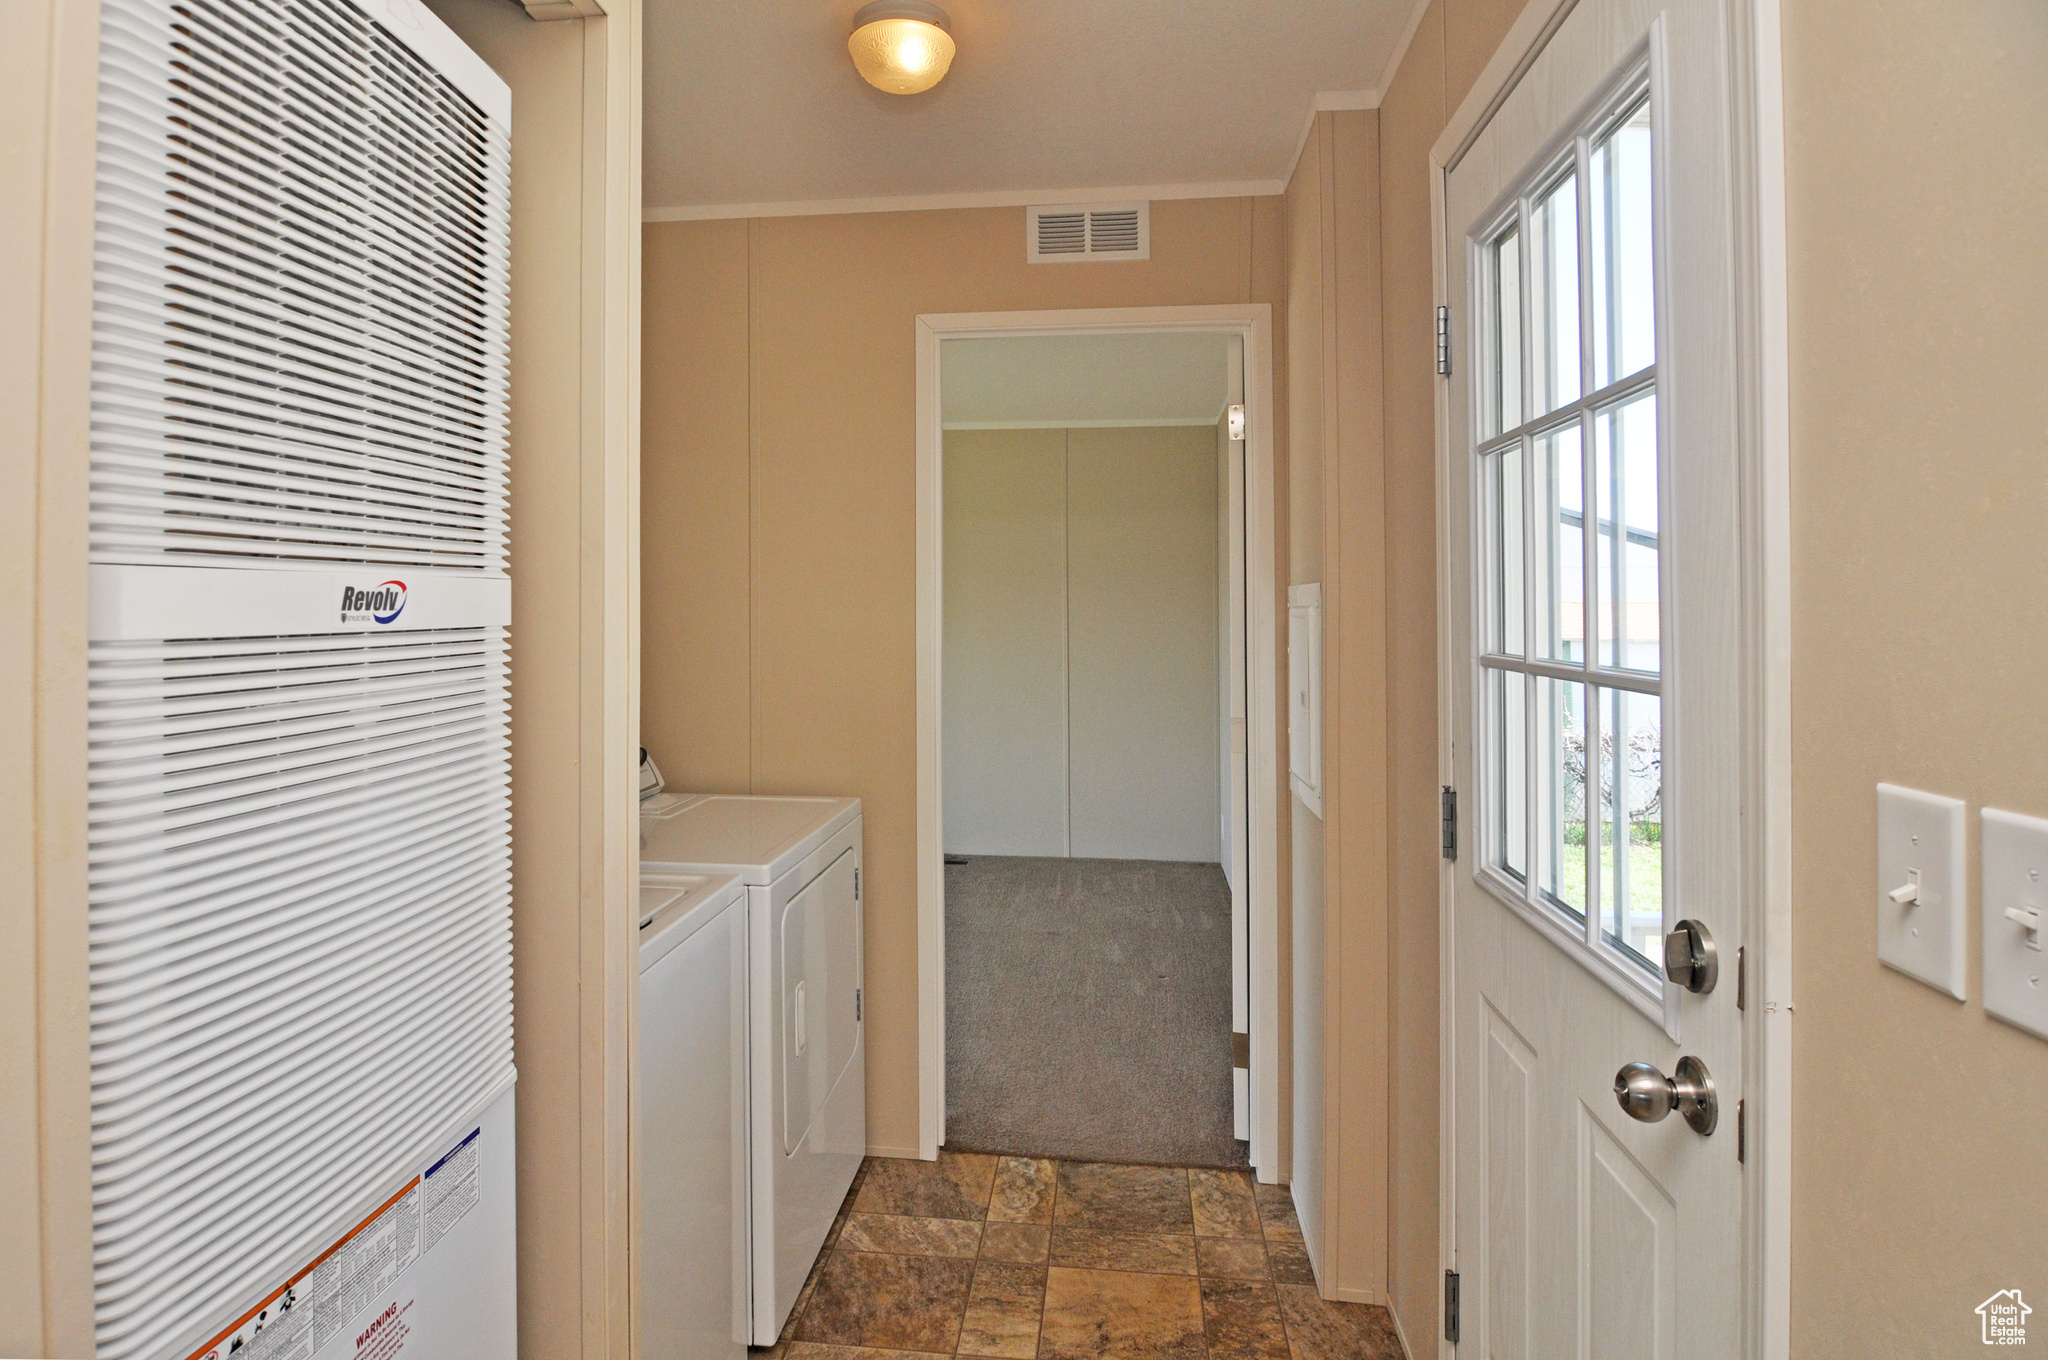 Laundry room featuring dark carpet, crown molding, and washing machine and clothes dryer